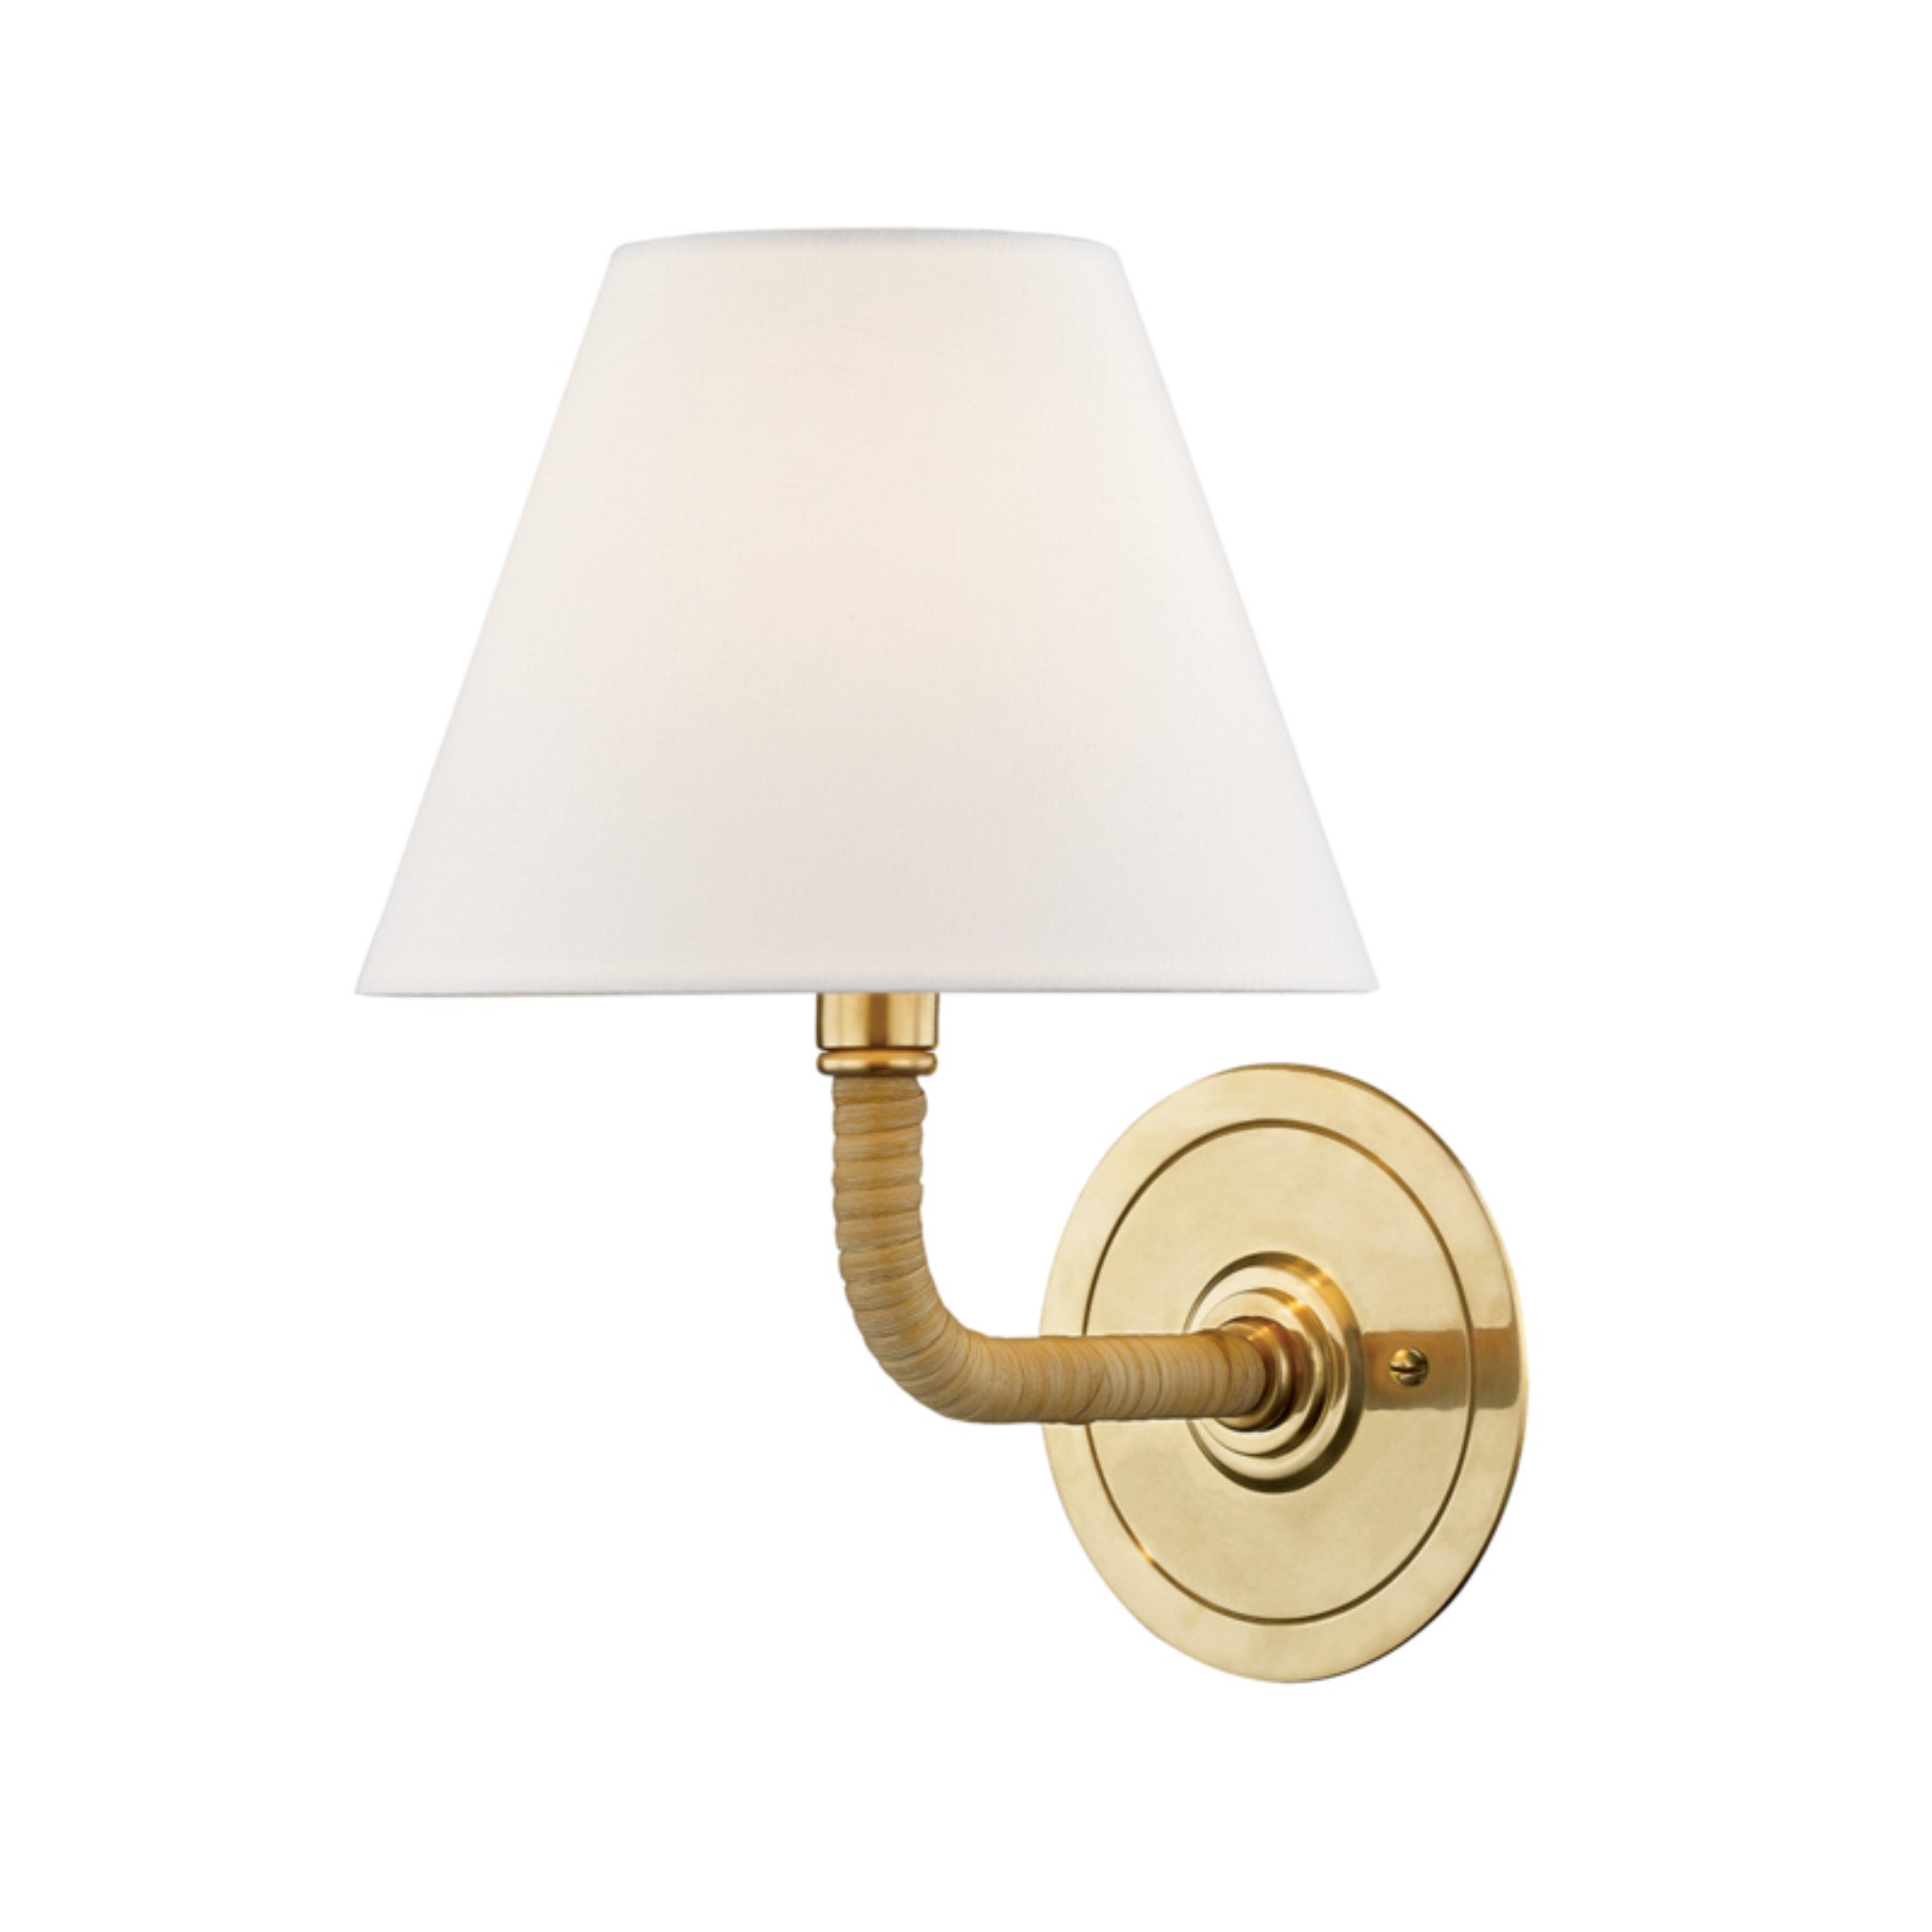 Curves No.1 1 Light Wall Sconce in Aged Brass by Mark D. Sikes